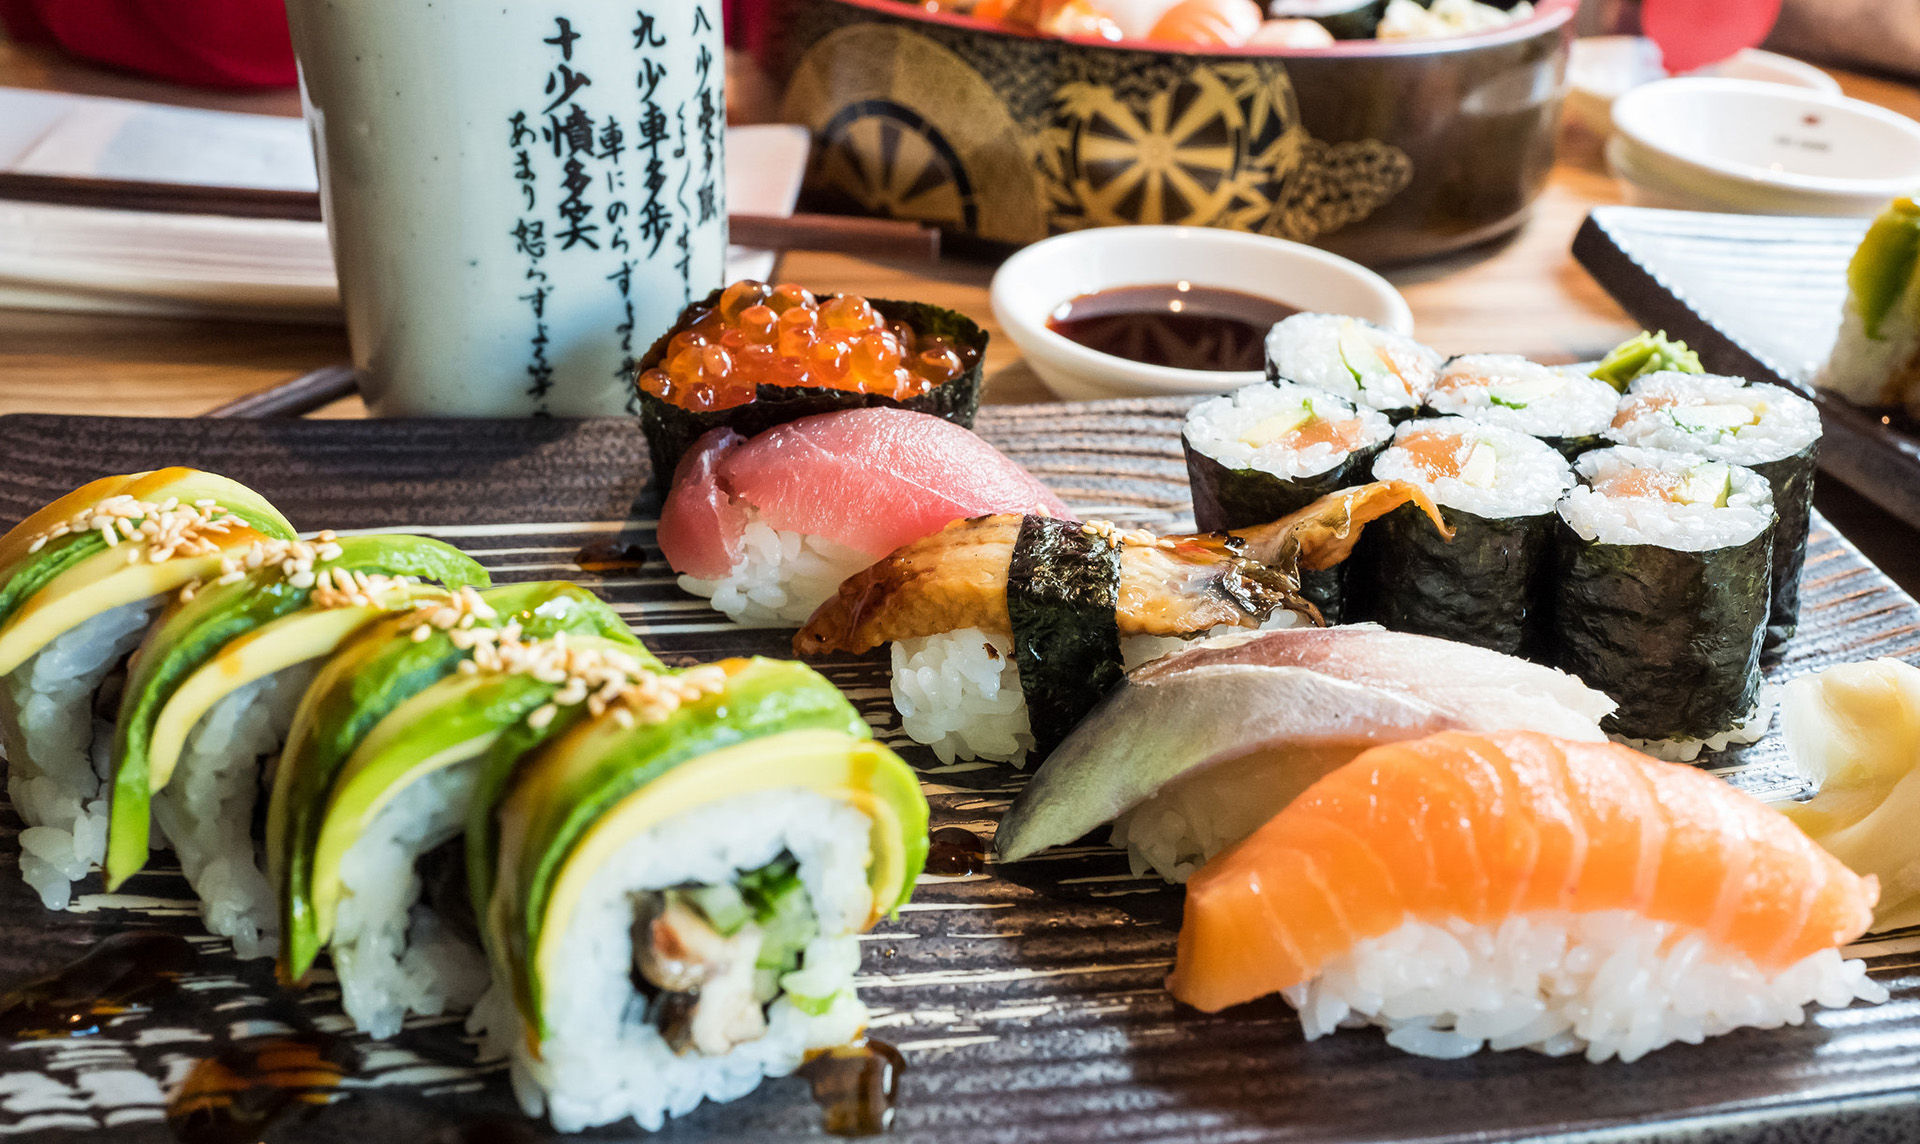 Eat the Best Sushi While in Kyoto - Cookly Magazine